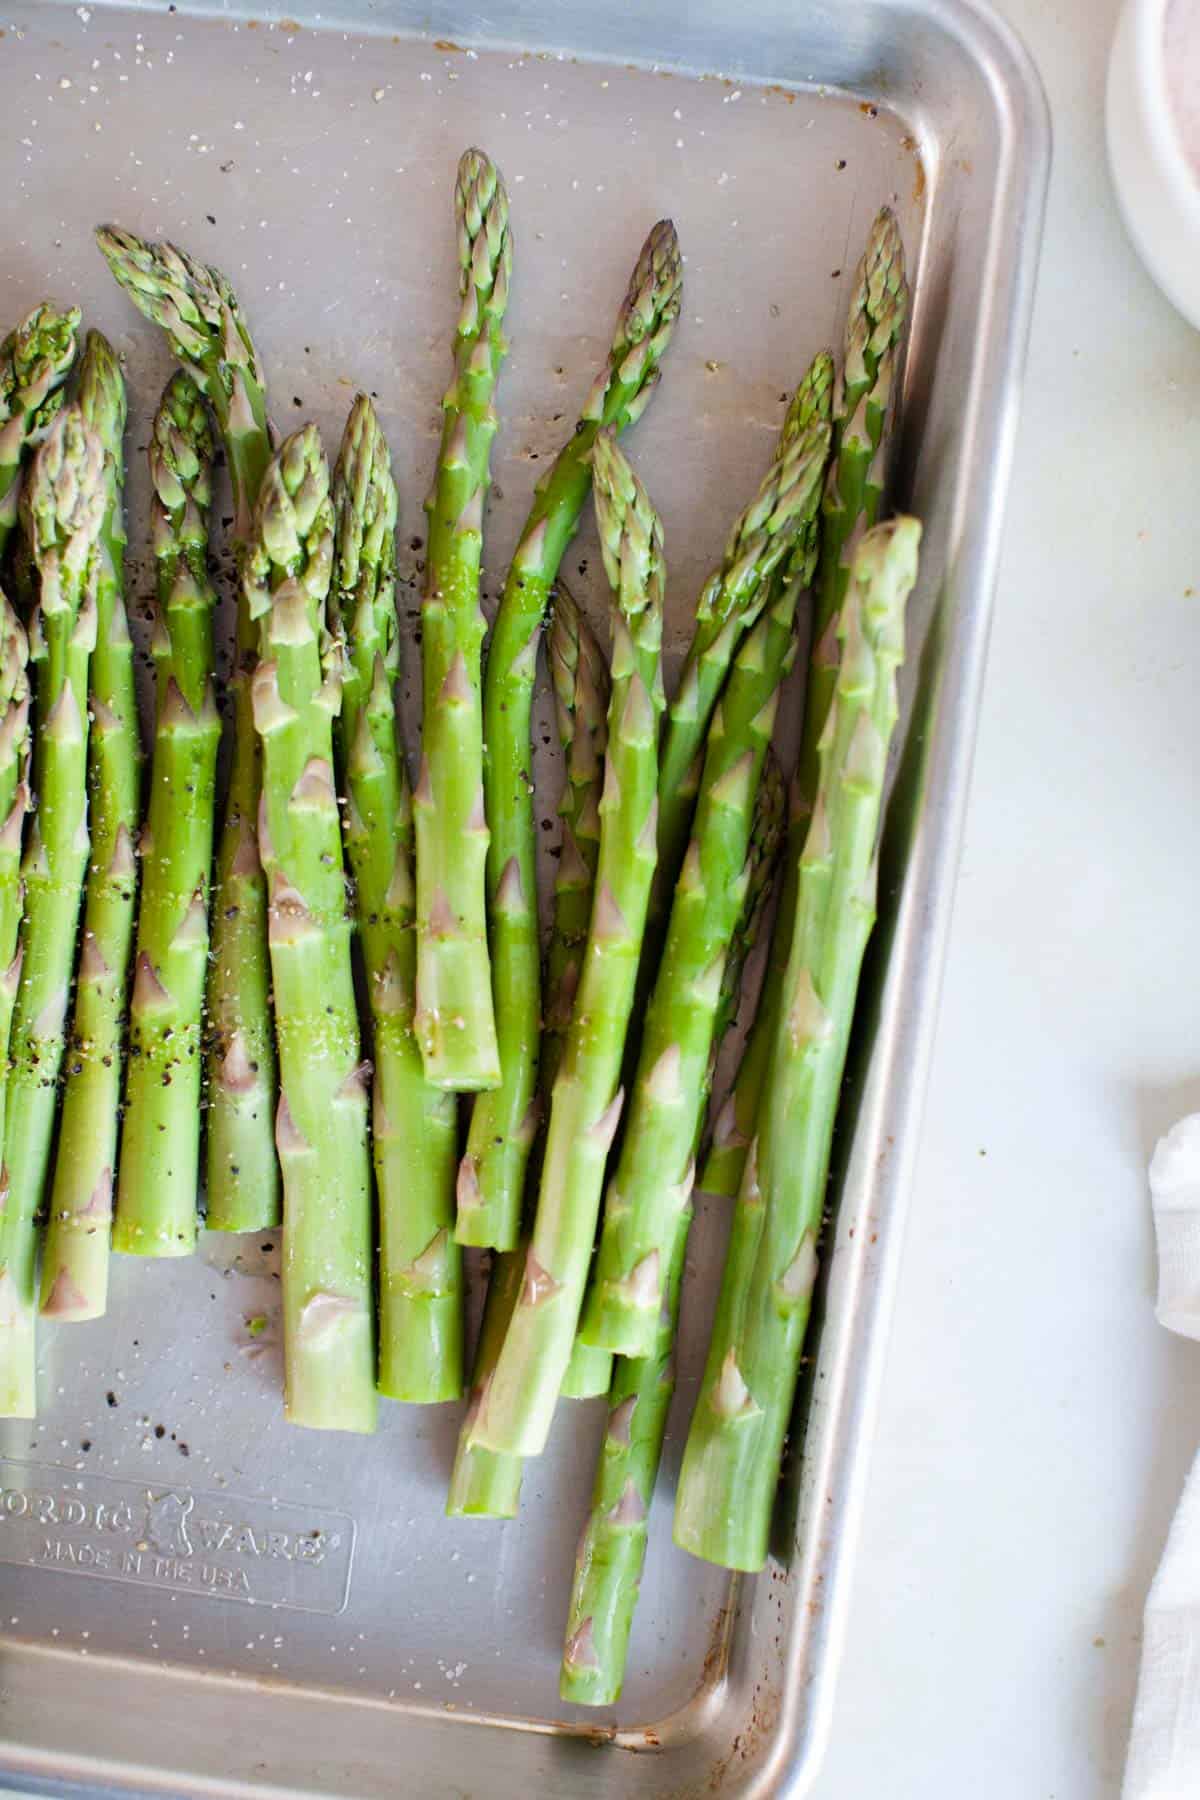 Uncooked asparagus spears on a baking sheet.